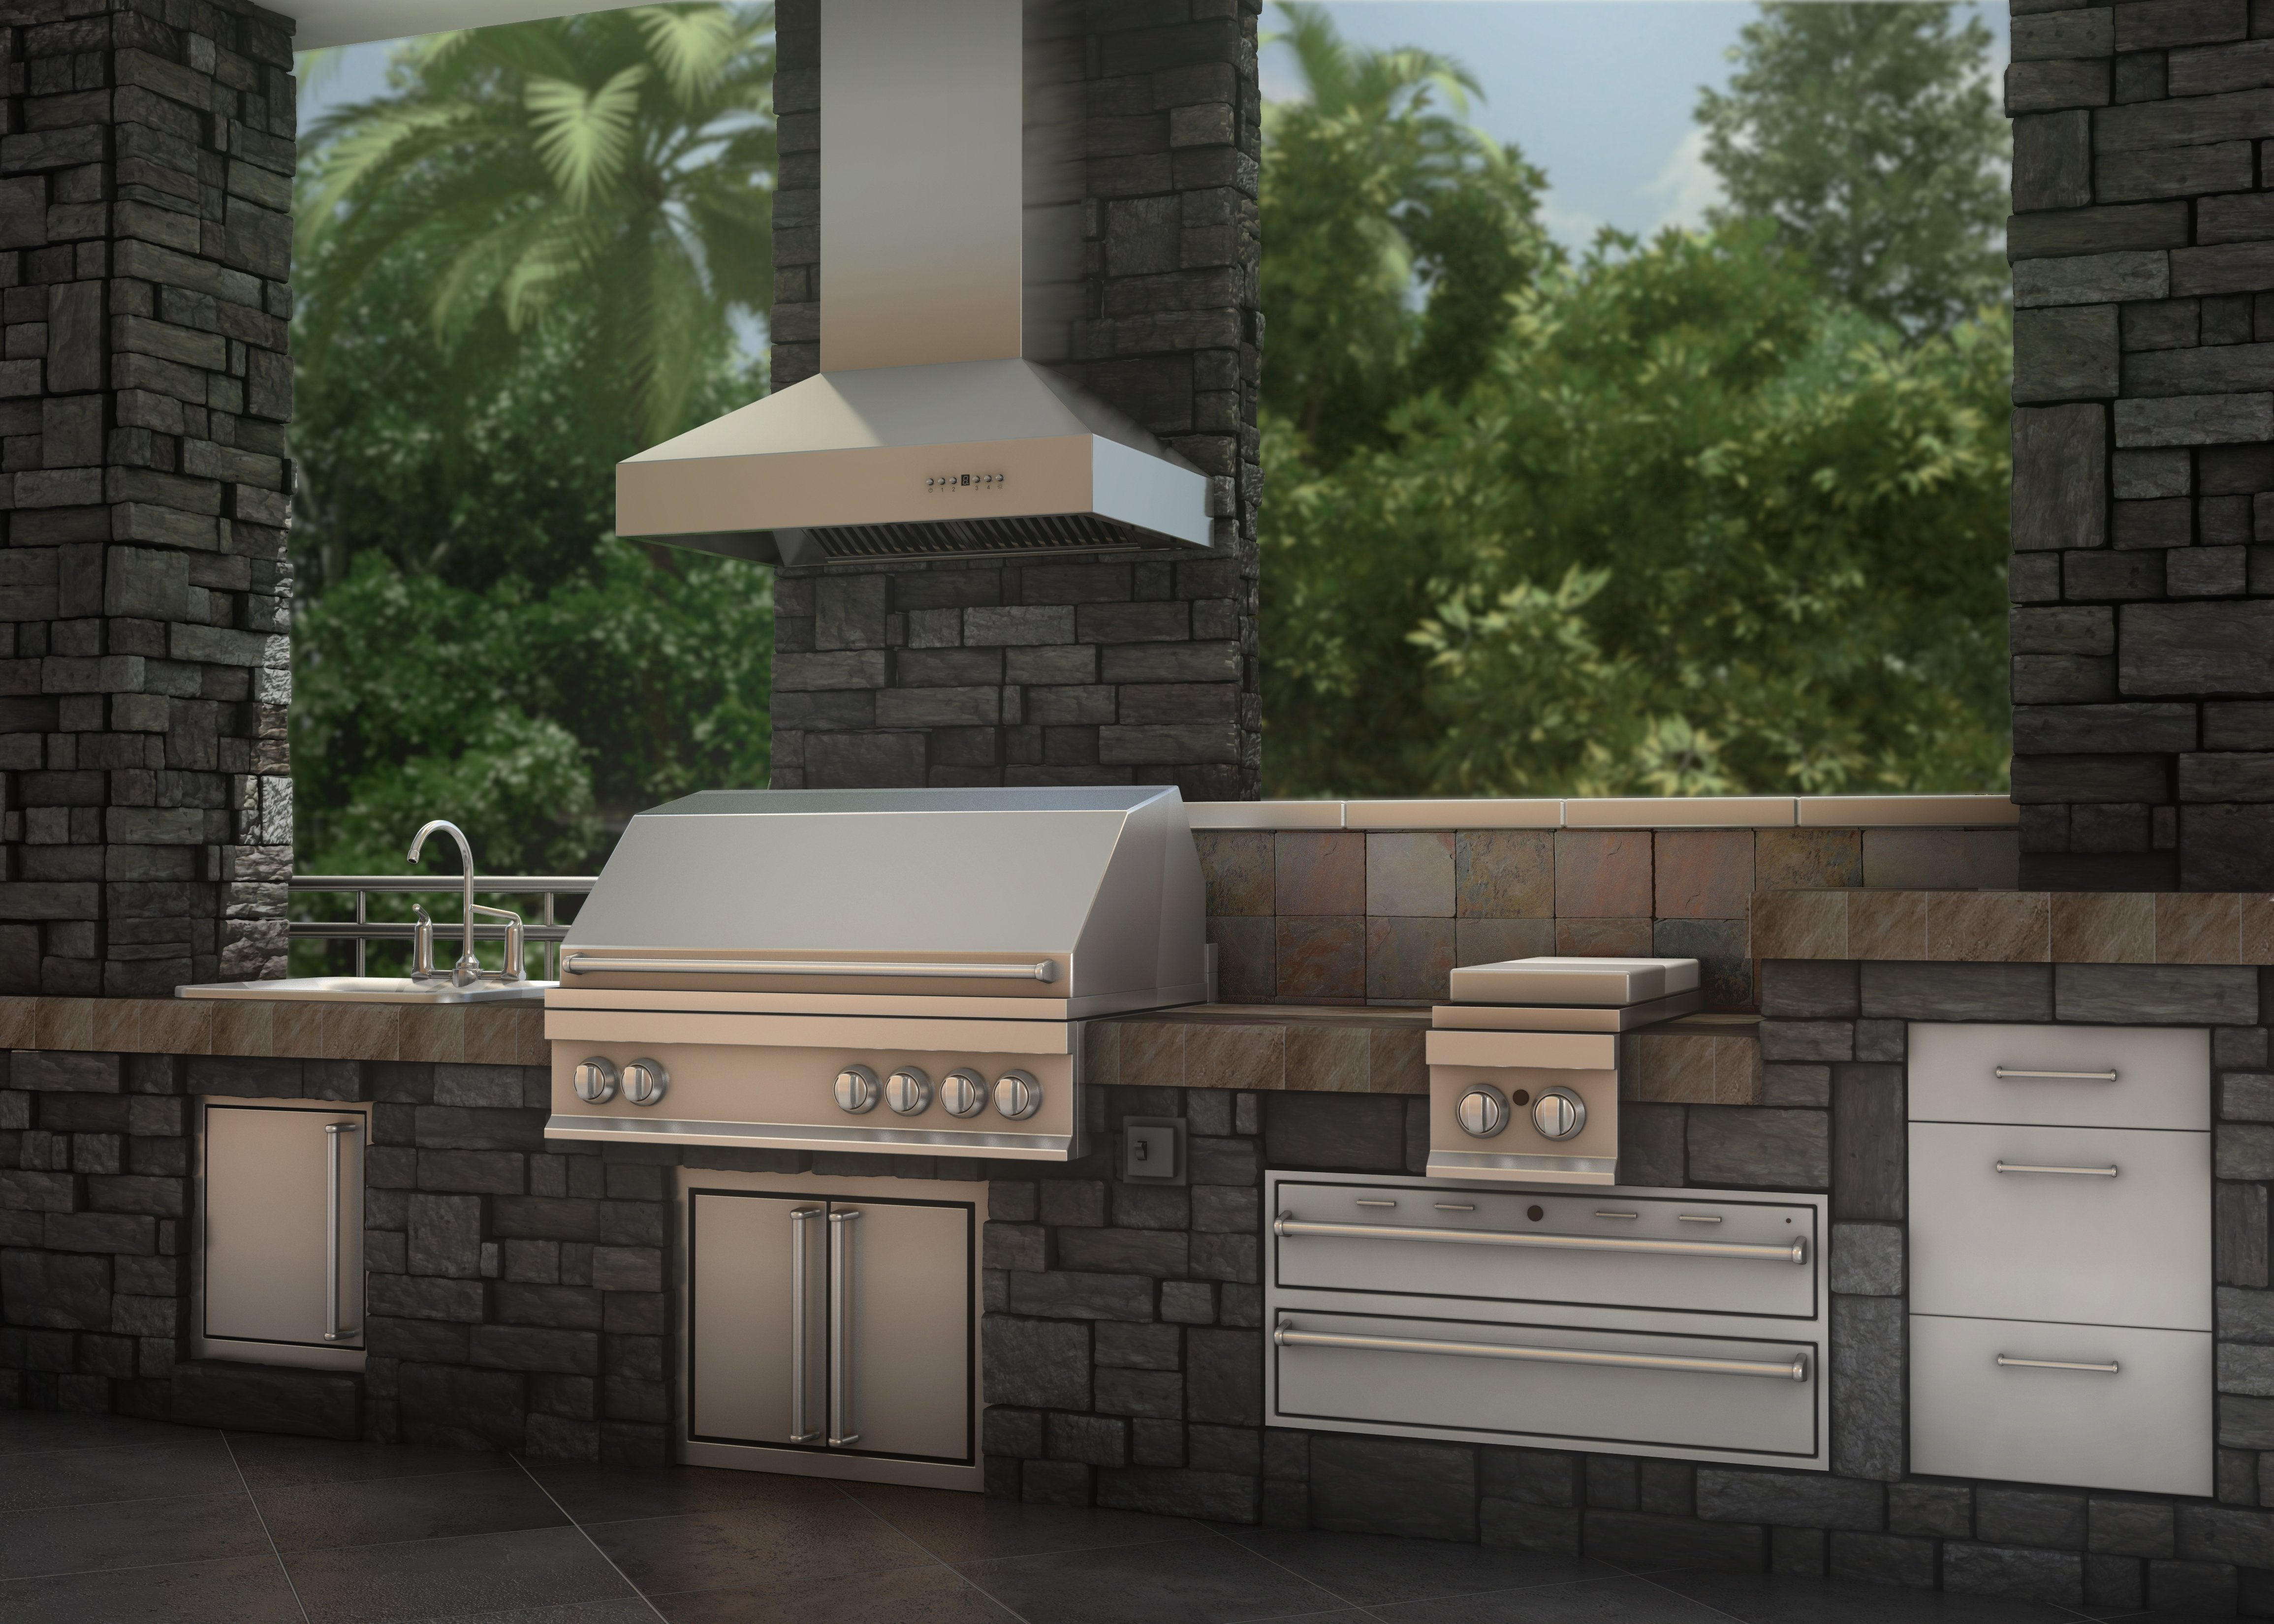 ZLINE 48" Outdoor Ducted Wall Mount Range Hood in Outdoor Approved Stainless Steel (667-304-48)